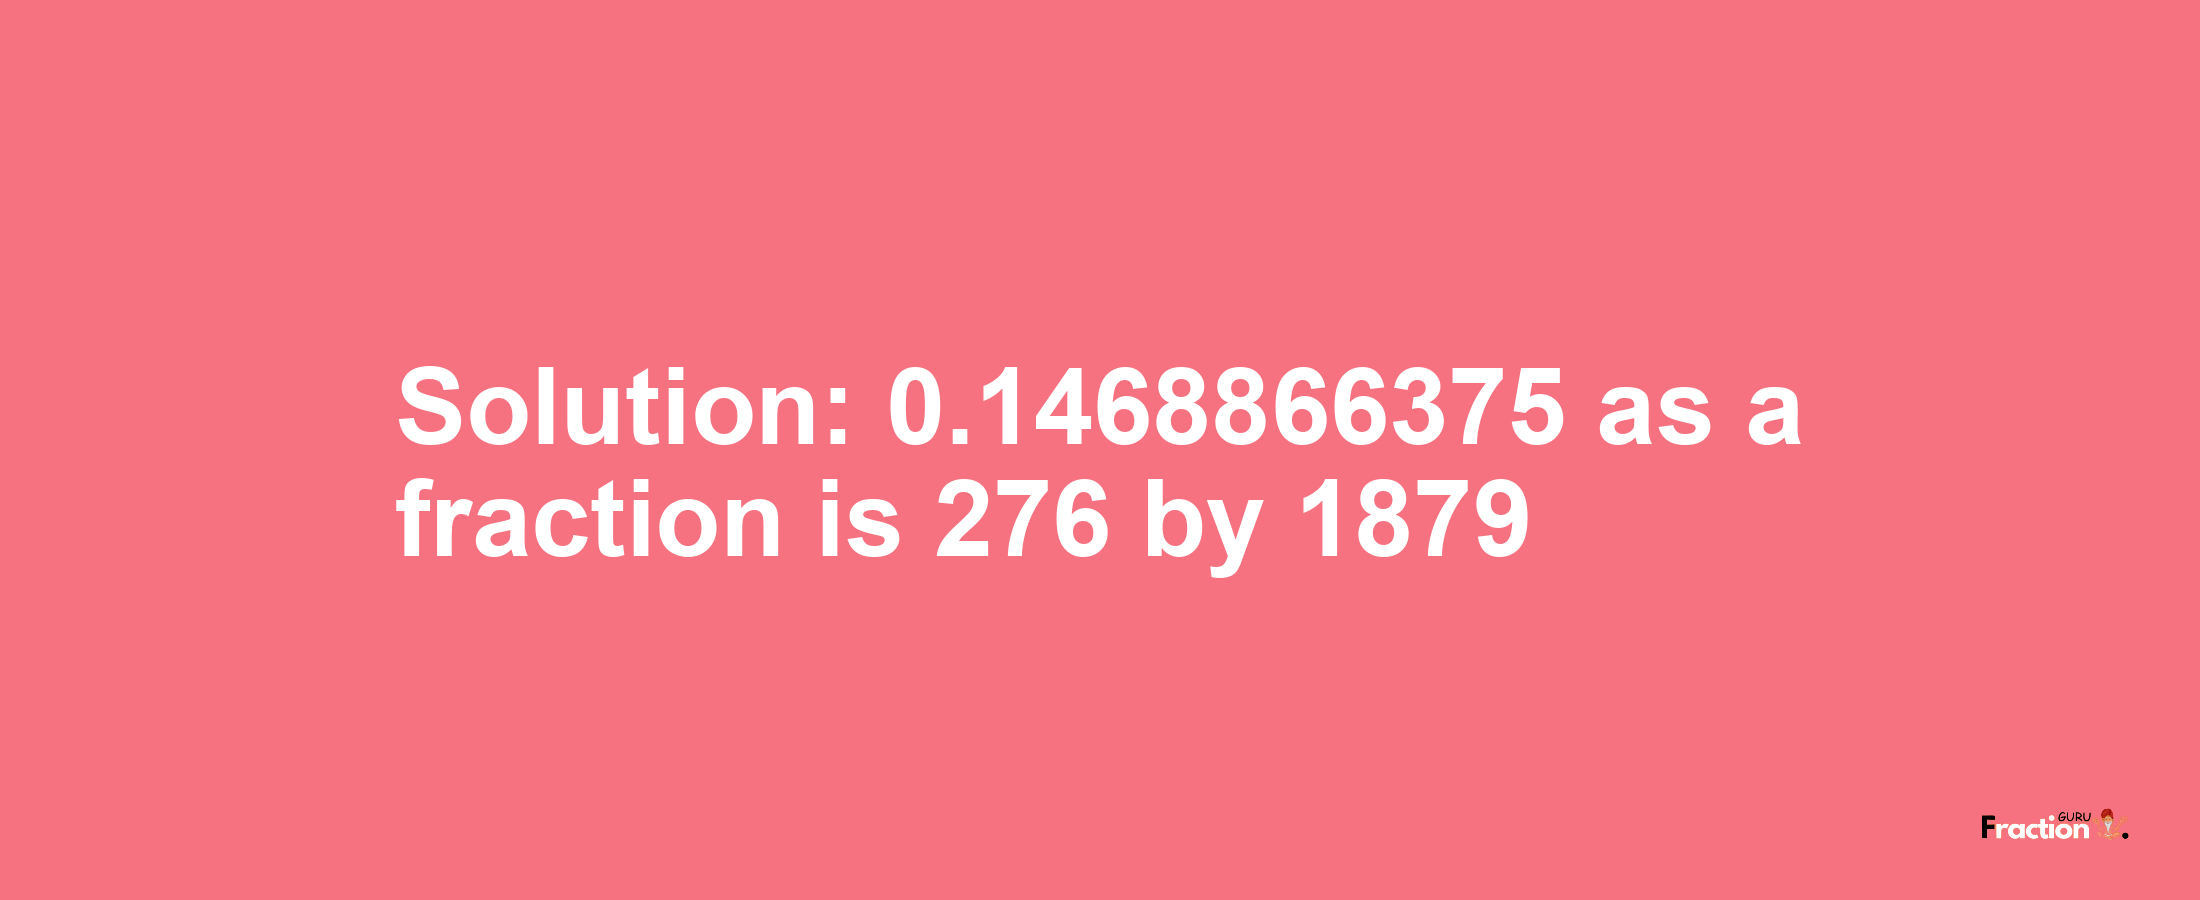 Solution:0.1468866375 as a fraction is 276/1879